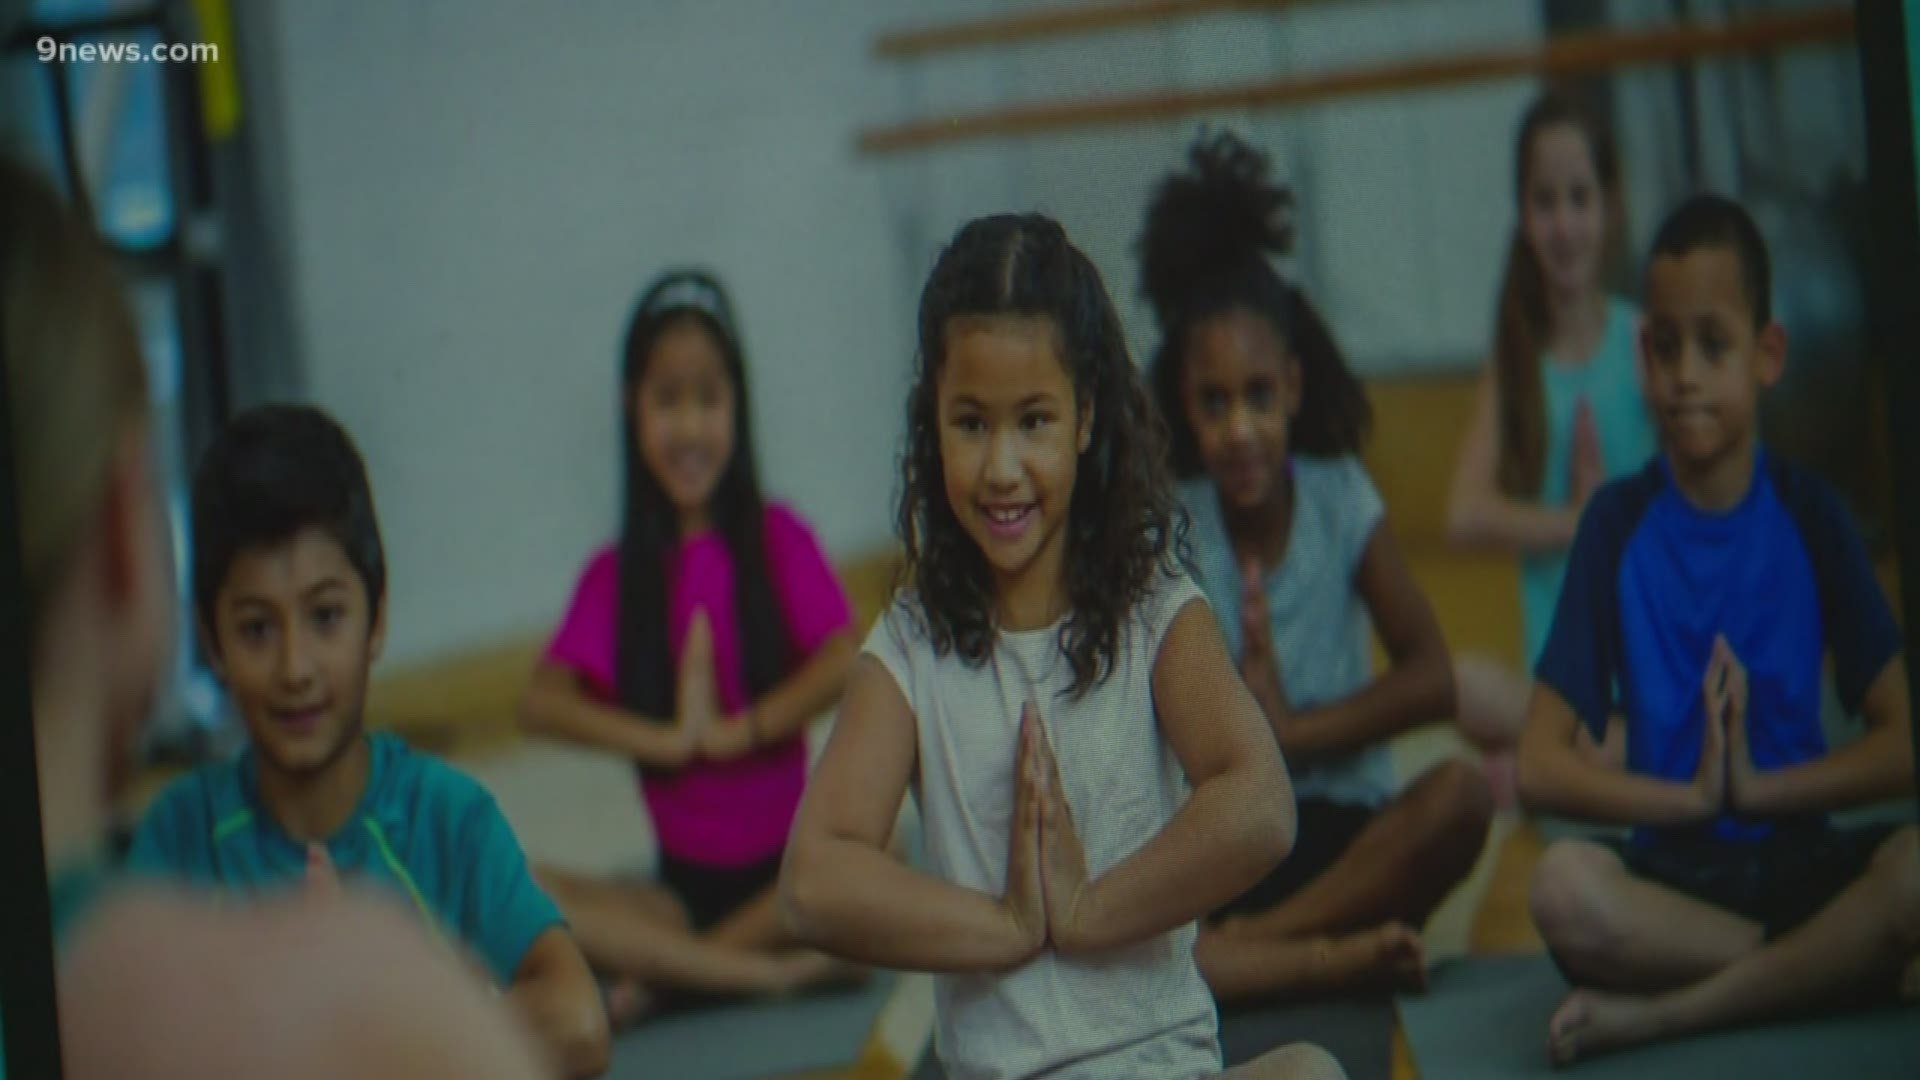 Starting yoga at a young age can help children become more mindful and help them reduce stress and become more confident.